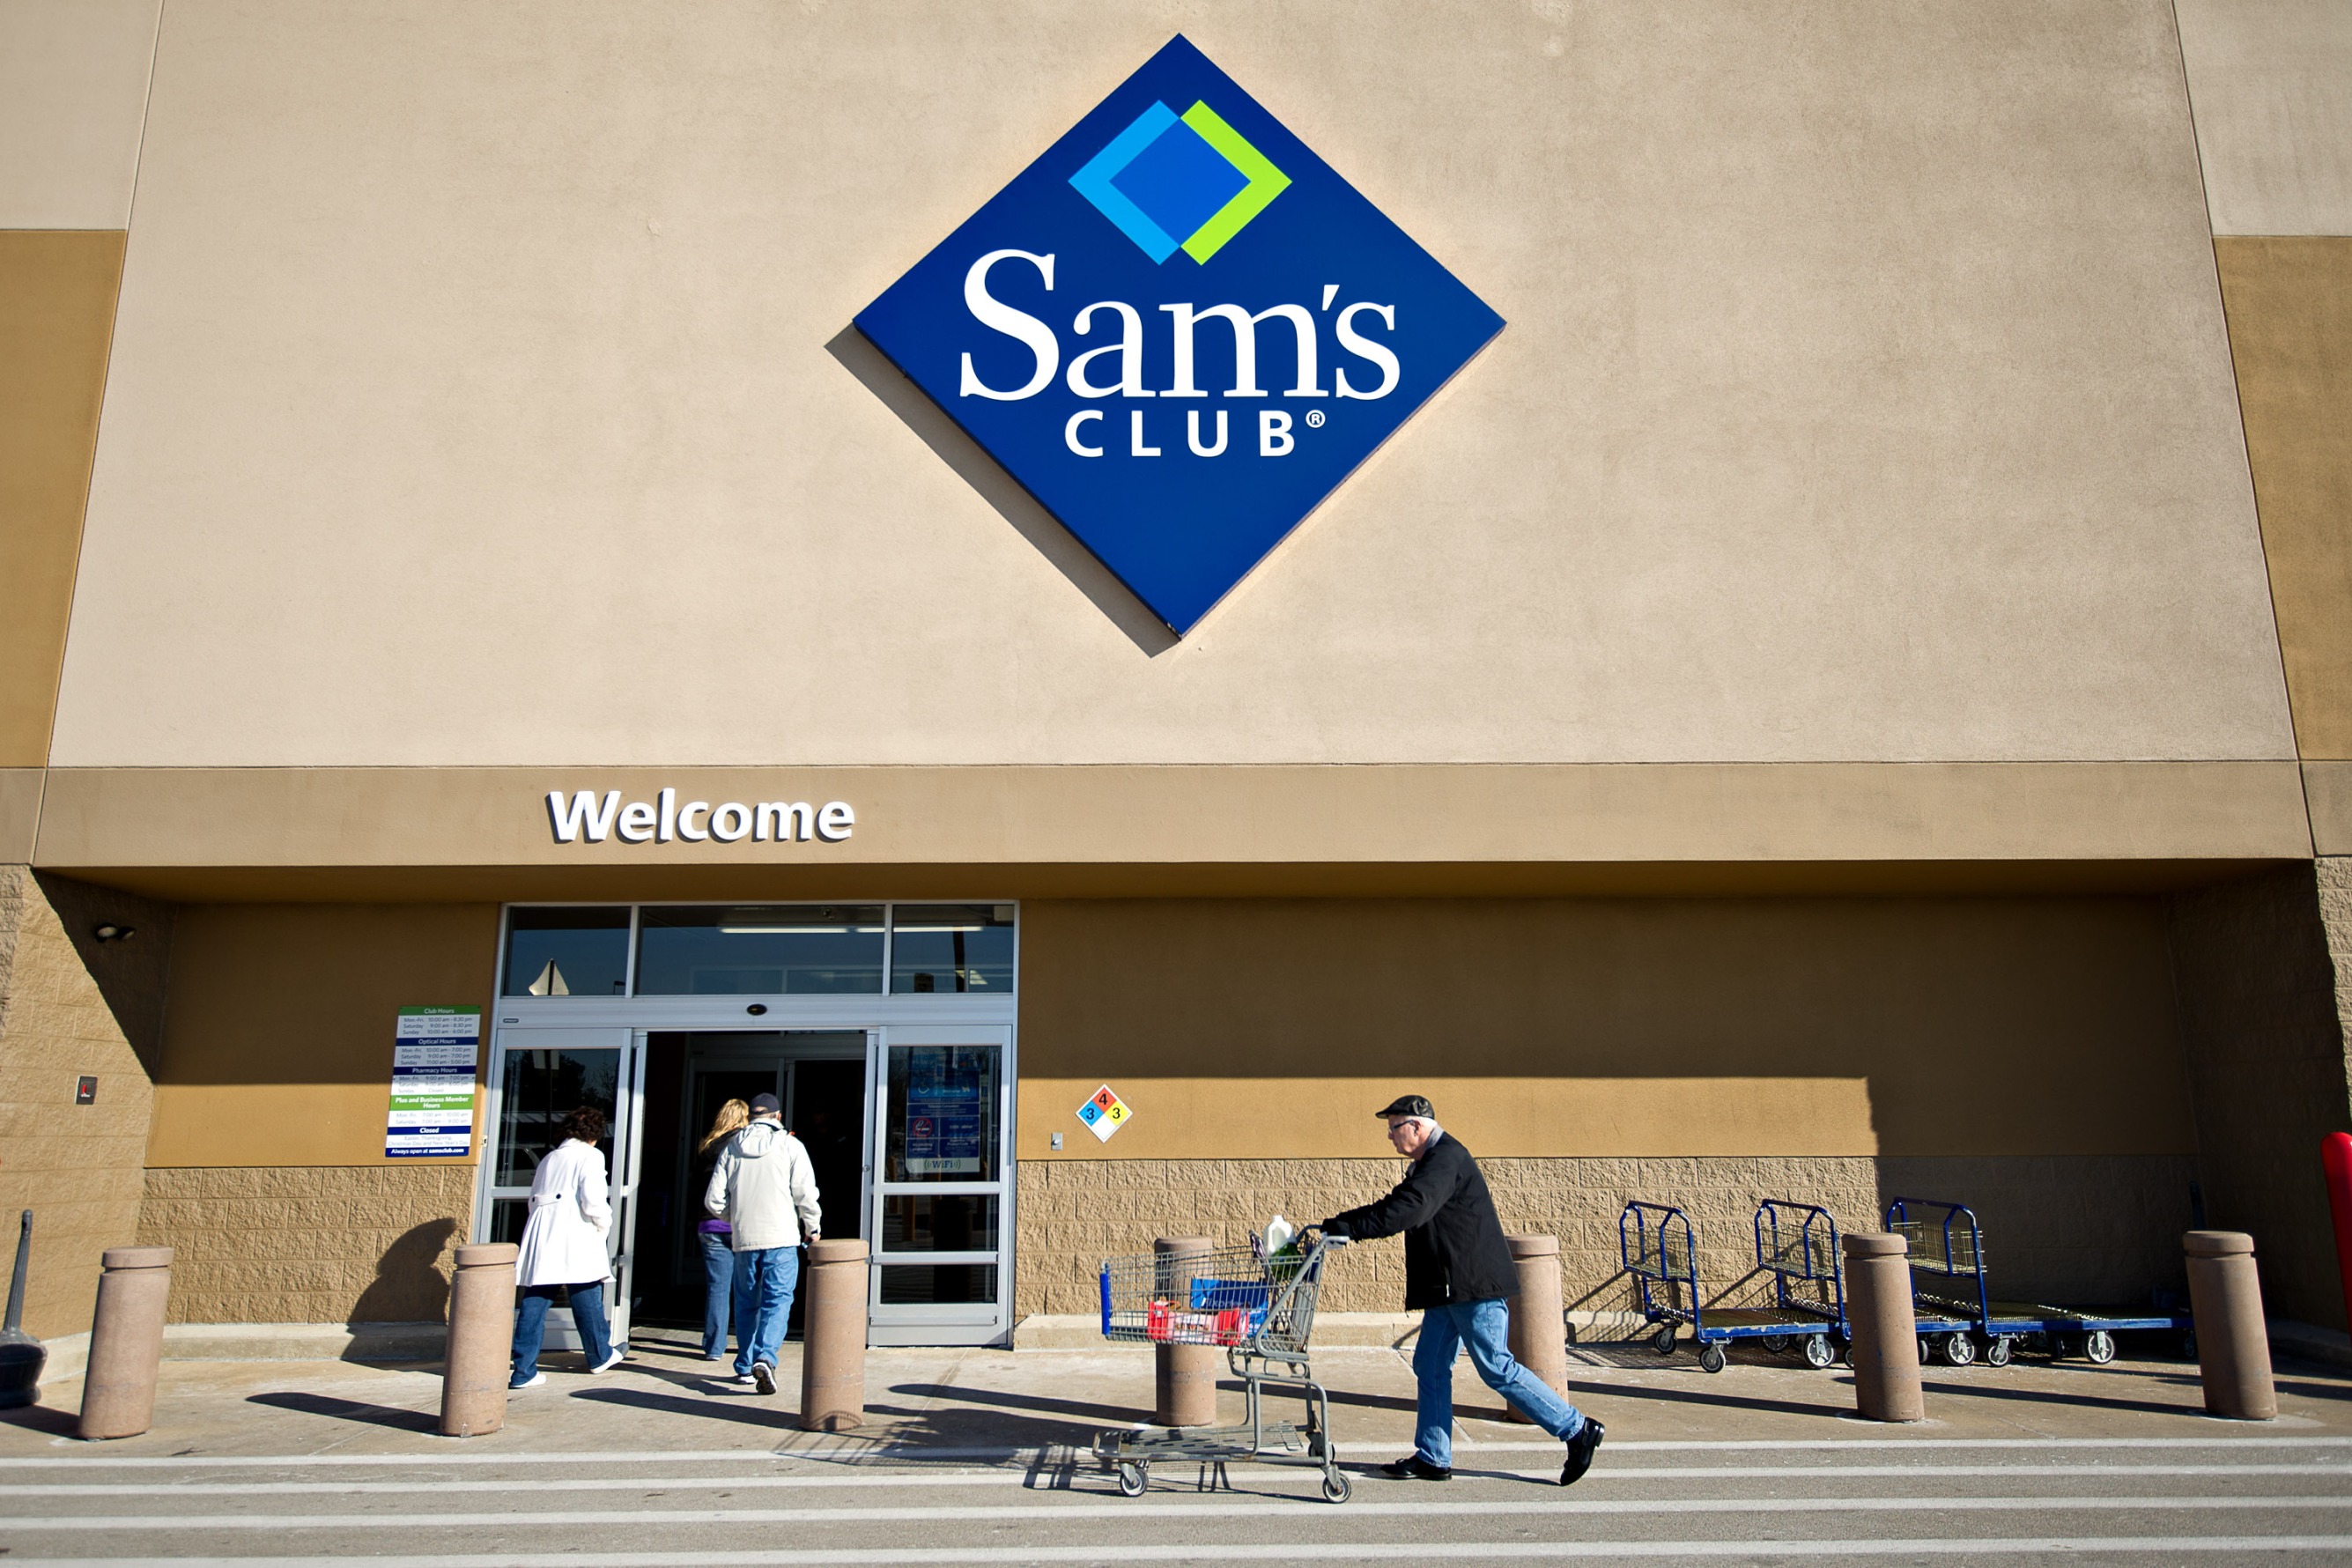 Sams Club At Walmart Wmt Plans 30 New Stores In Return To Growth